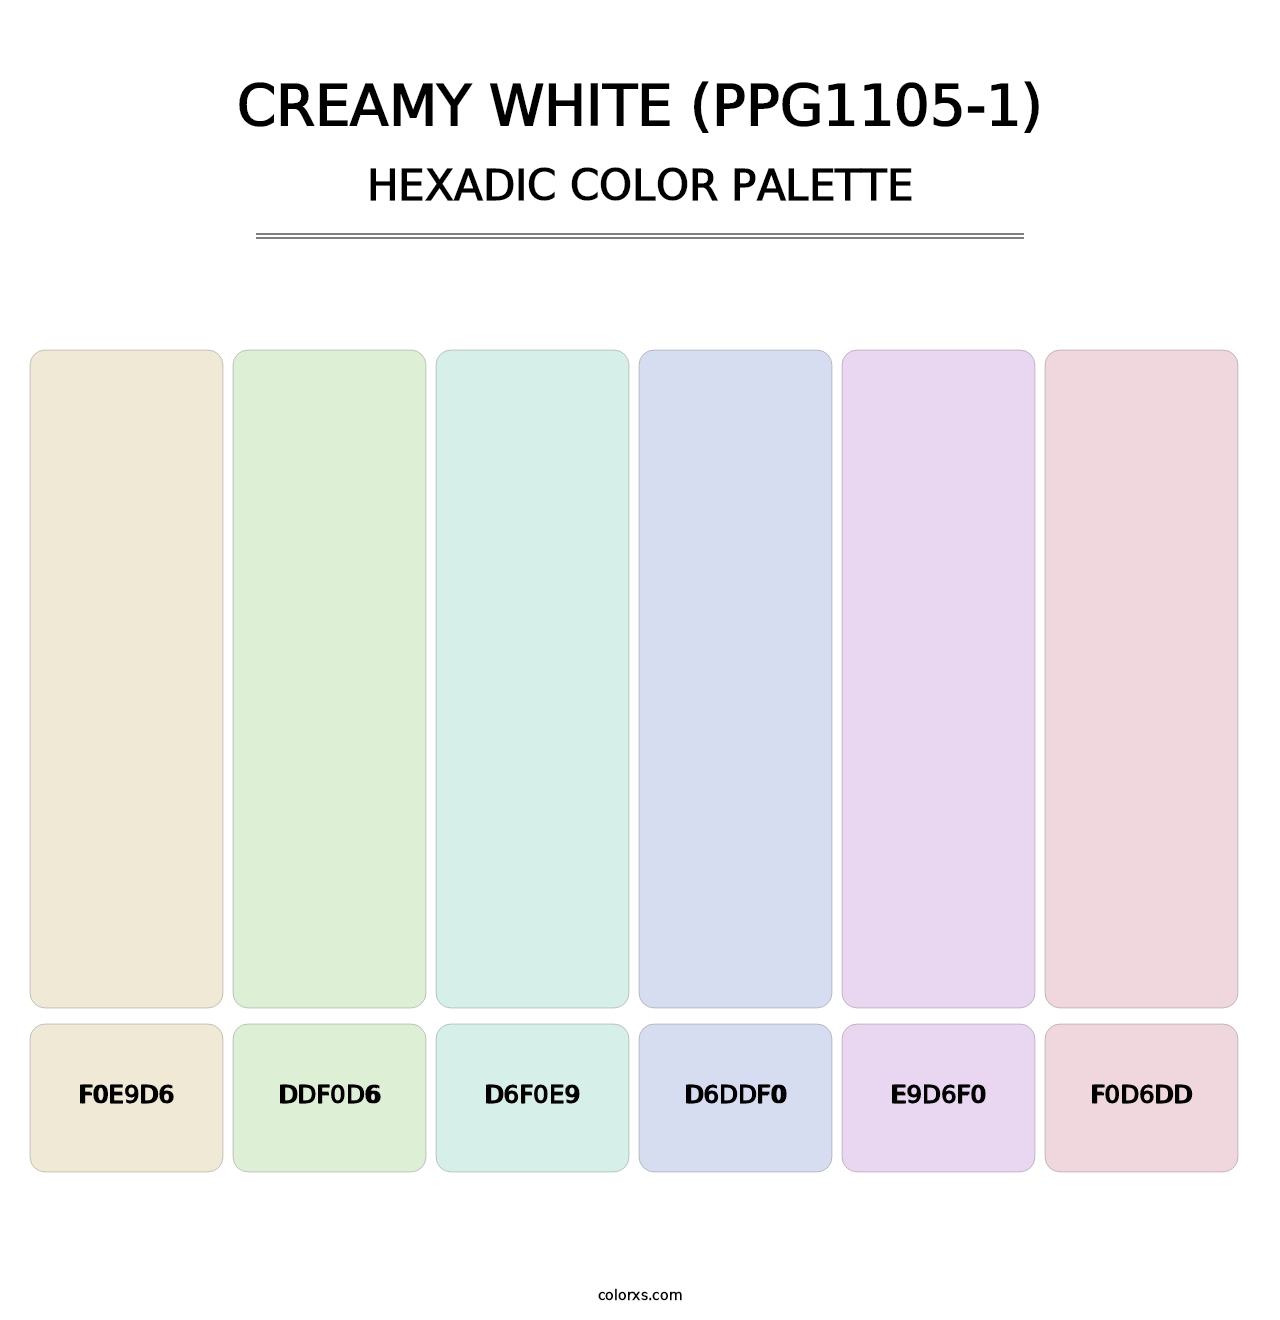 Creamy White (PPG1105-1) - Hexadic Color Palette